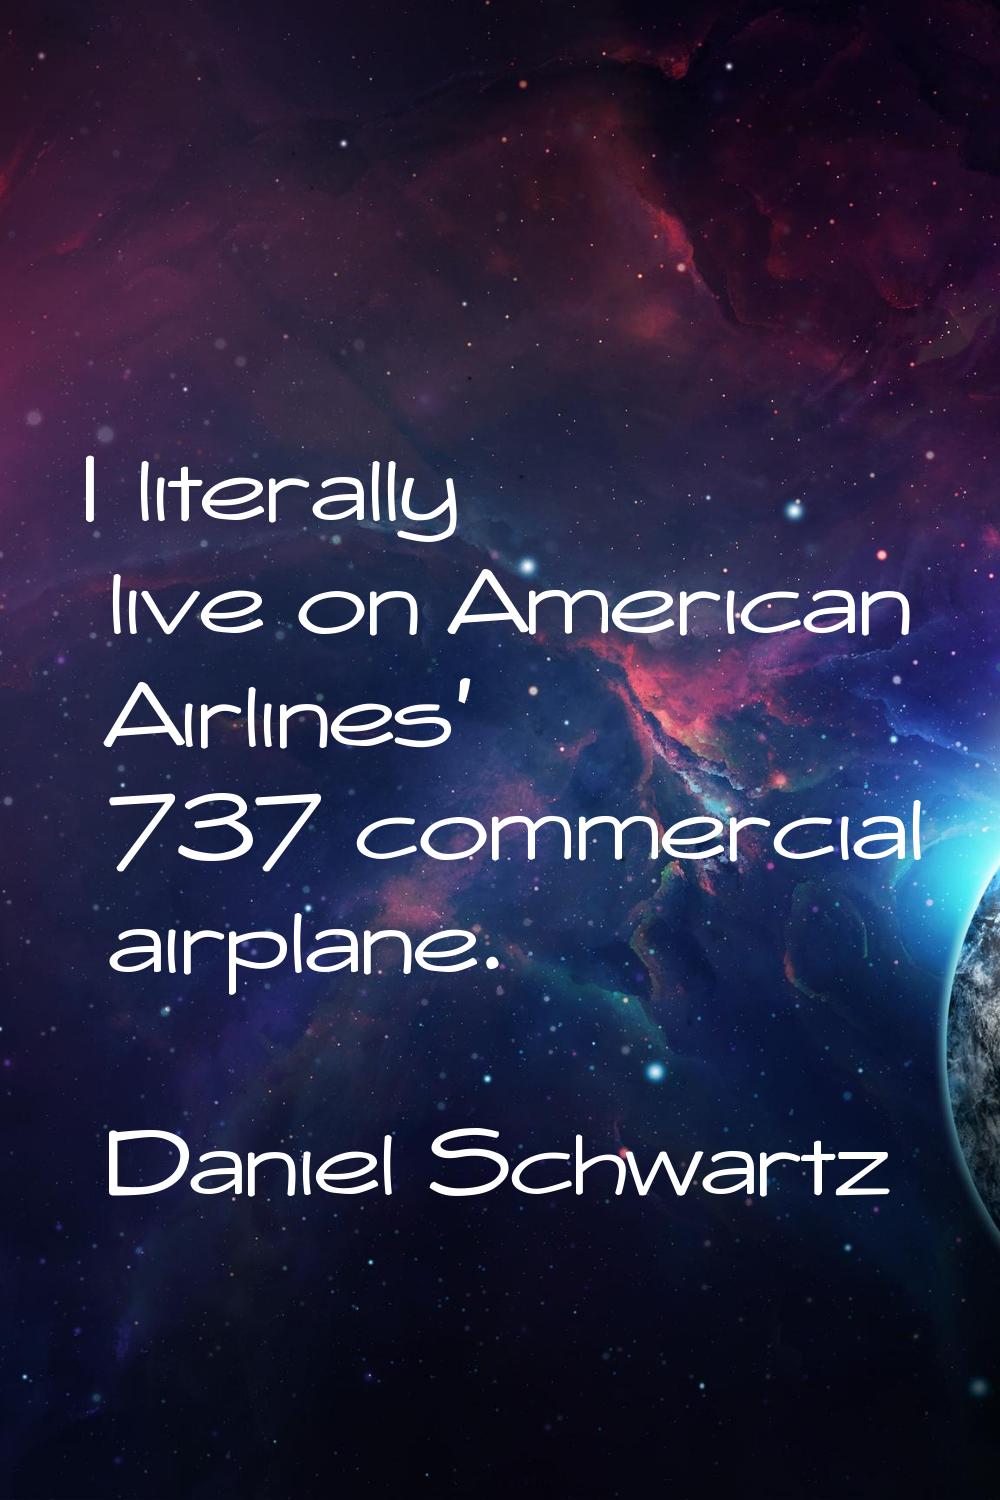 I literally live on American Airlines' 737 commercial airplane.